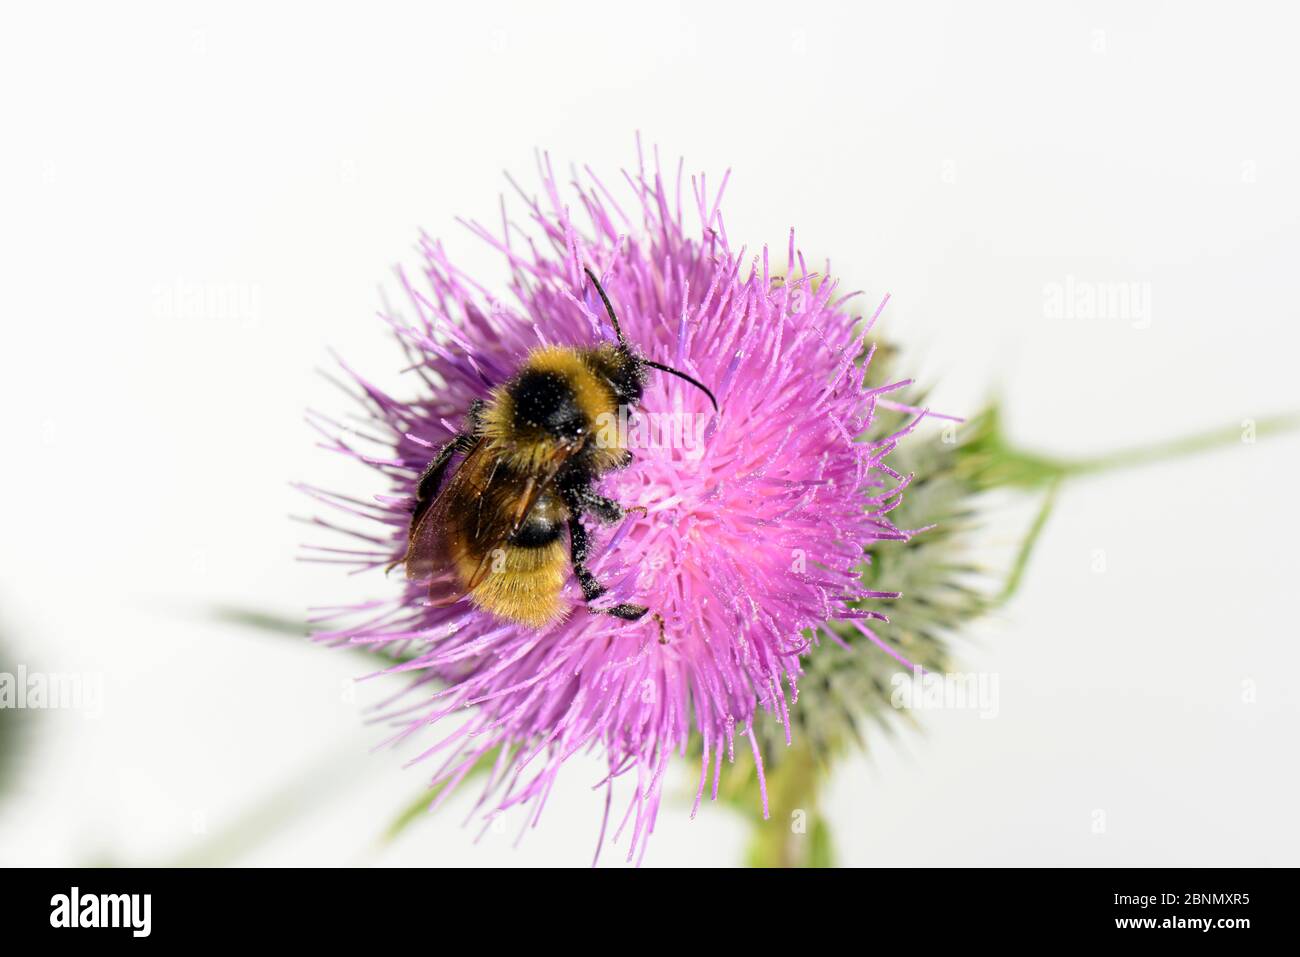 Field Cuckoo bumblebee (Bombus campestris) on Spear thistle (Cirsium vulgare), Herefordshire, England. Stock Photo